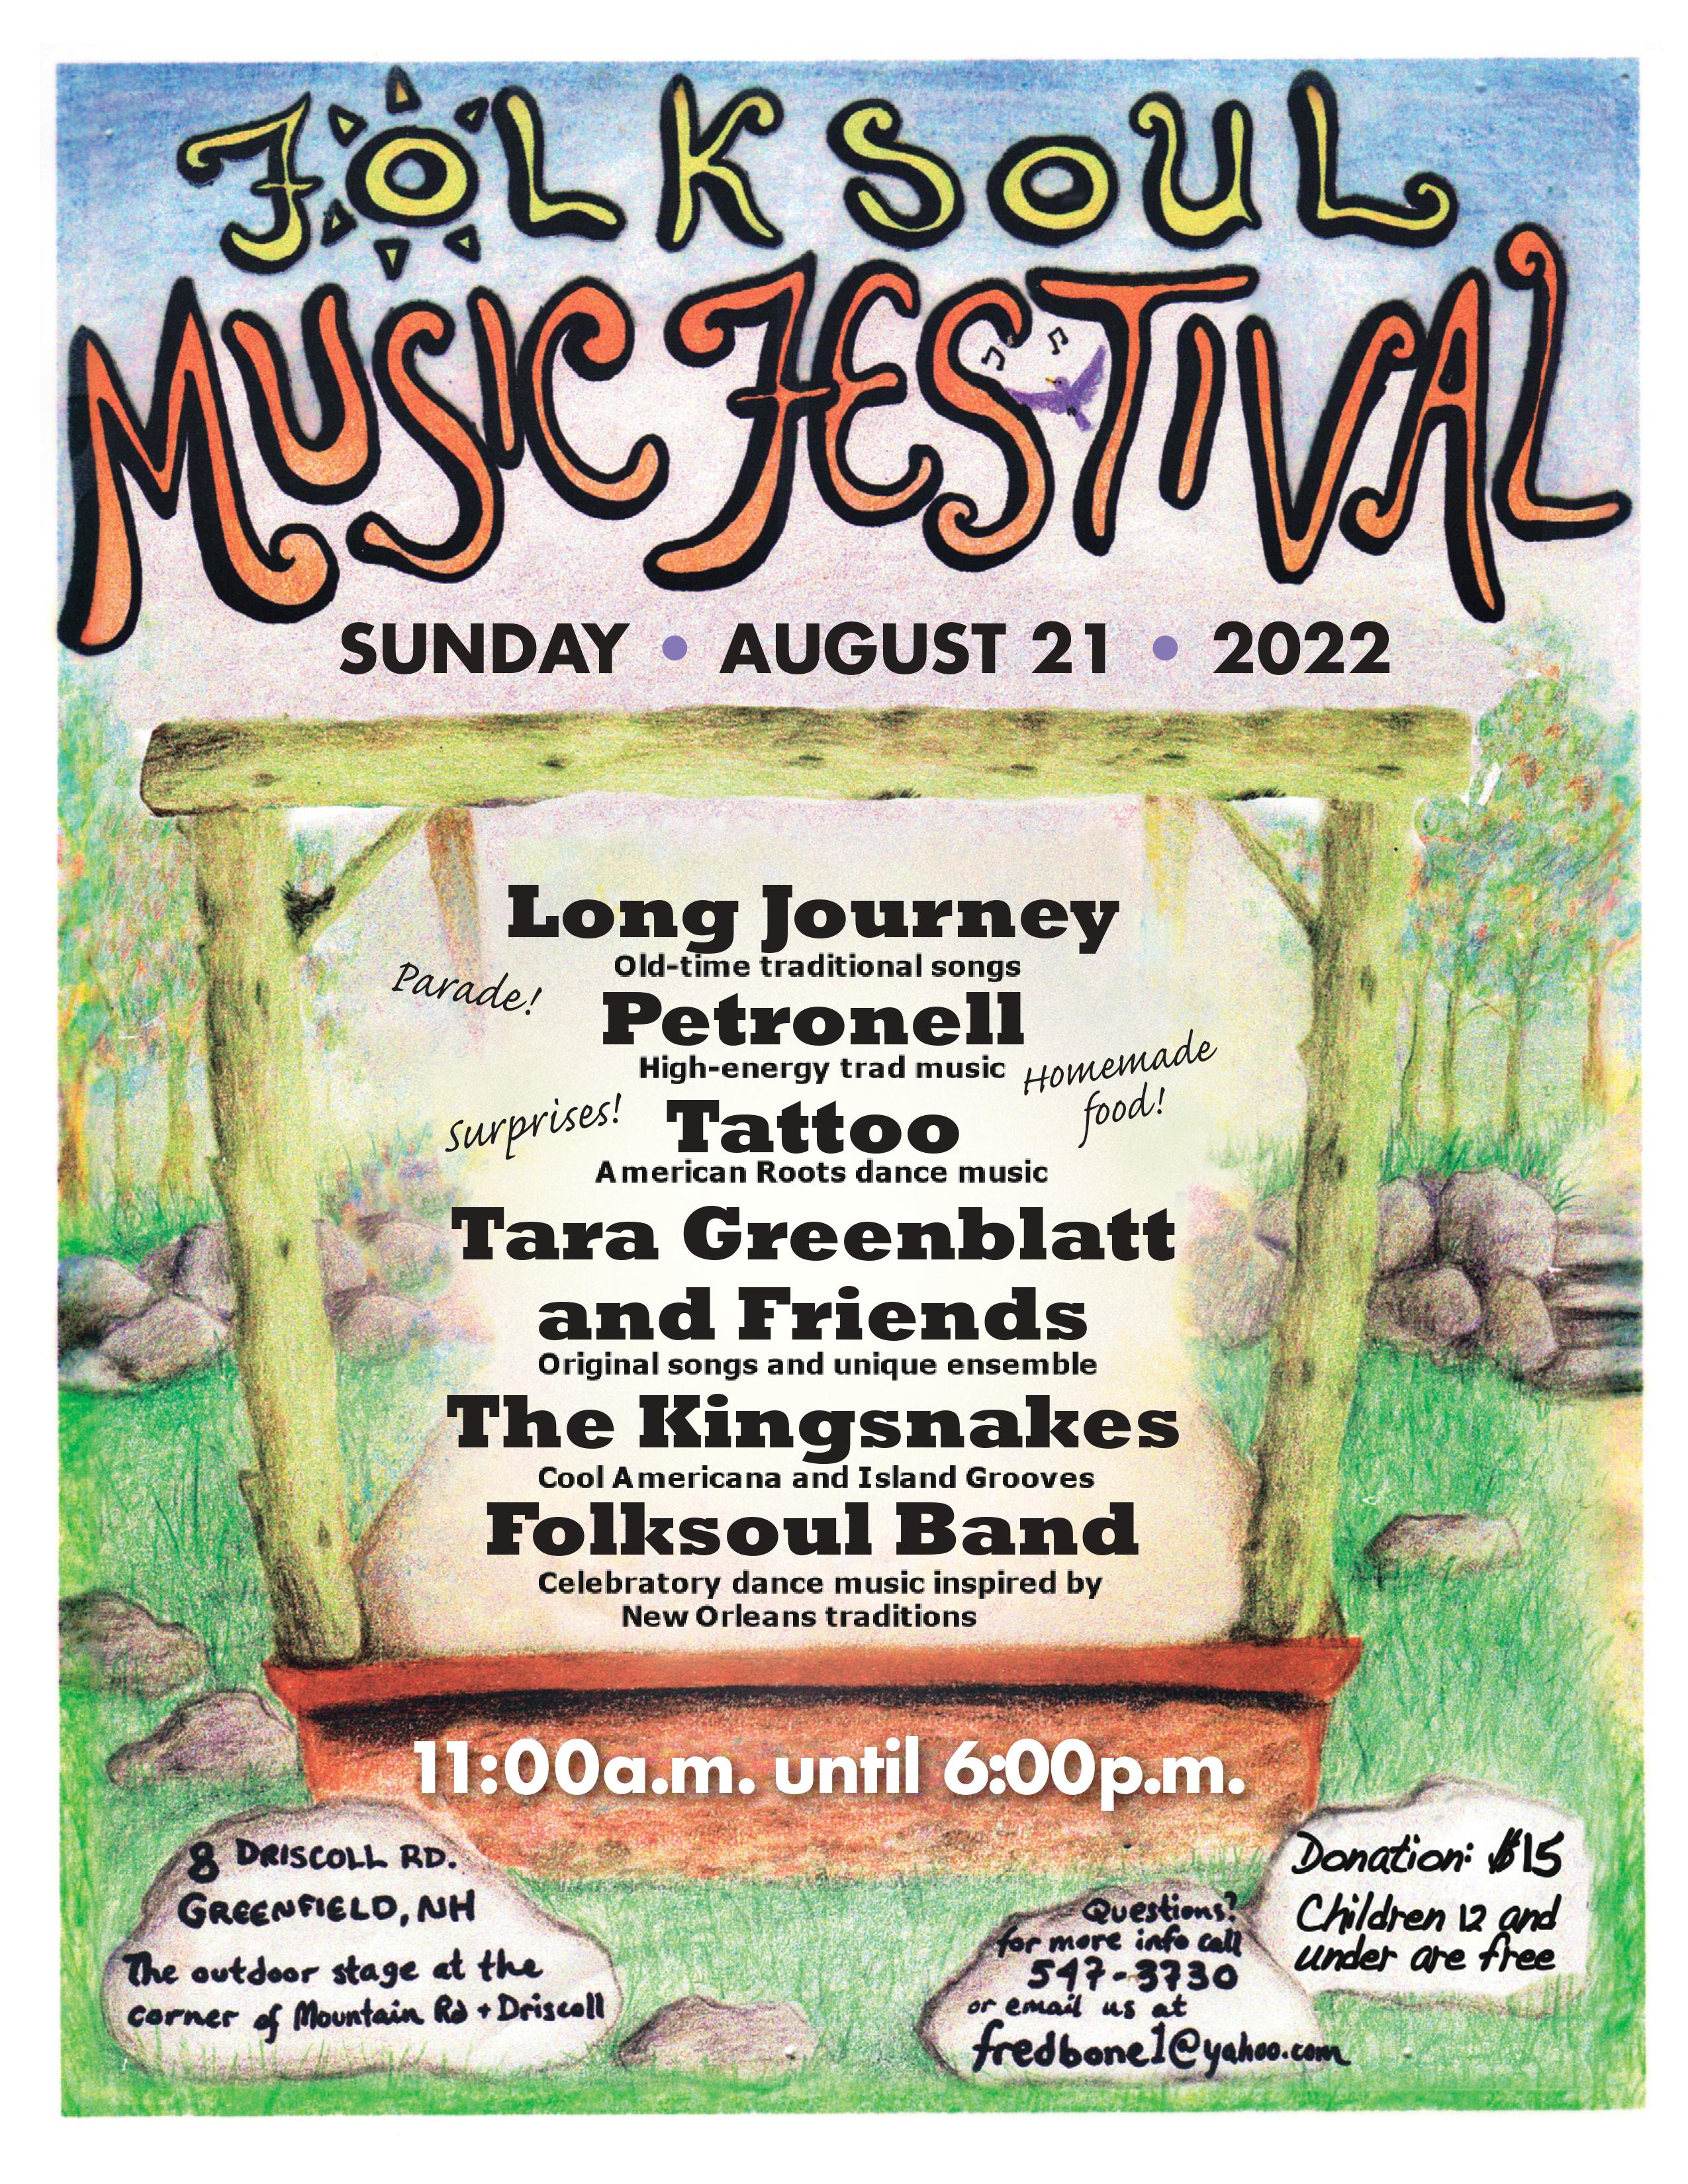 Folksoul Music Festival @ The Outdoor Stage at 8 Driscoll Rd.